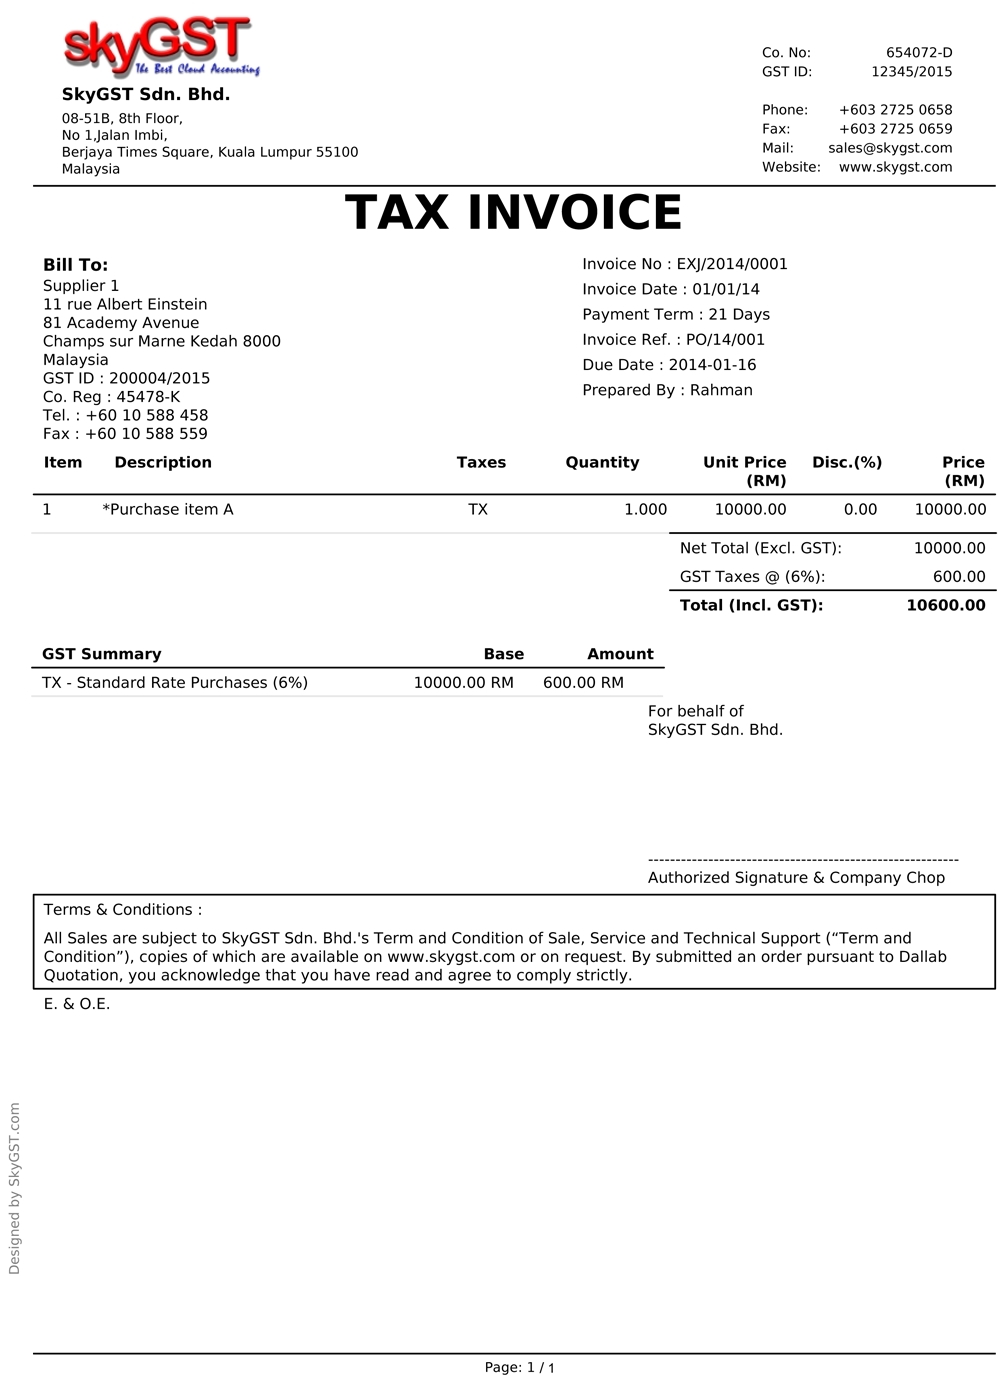 tax invoice example invoice template free 2016 tax invoice format